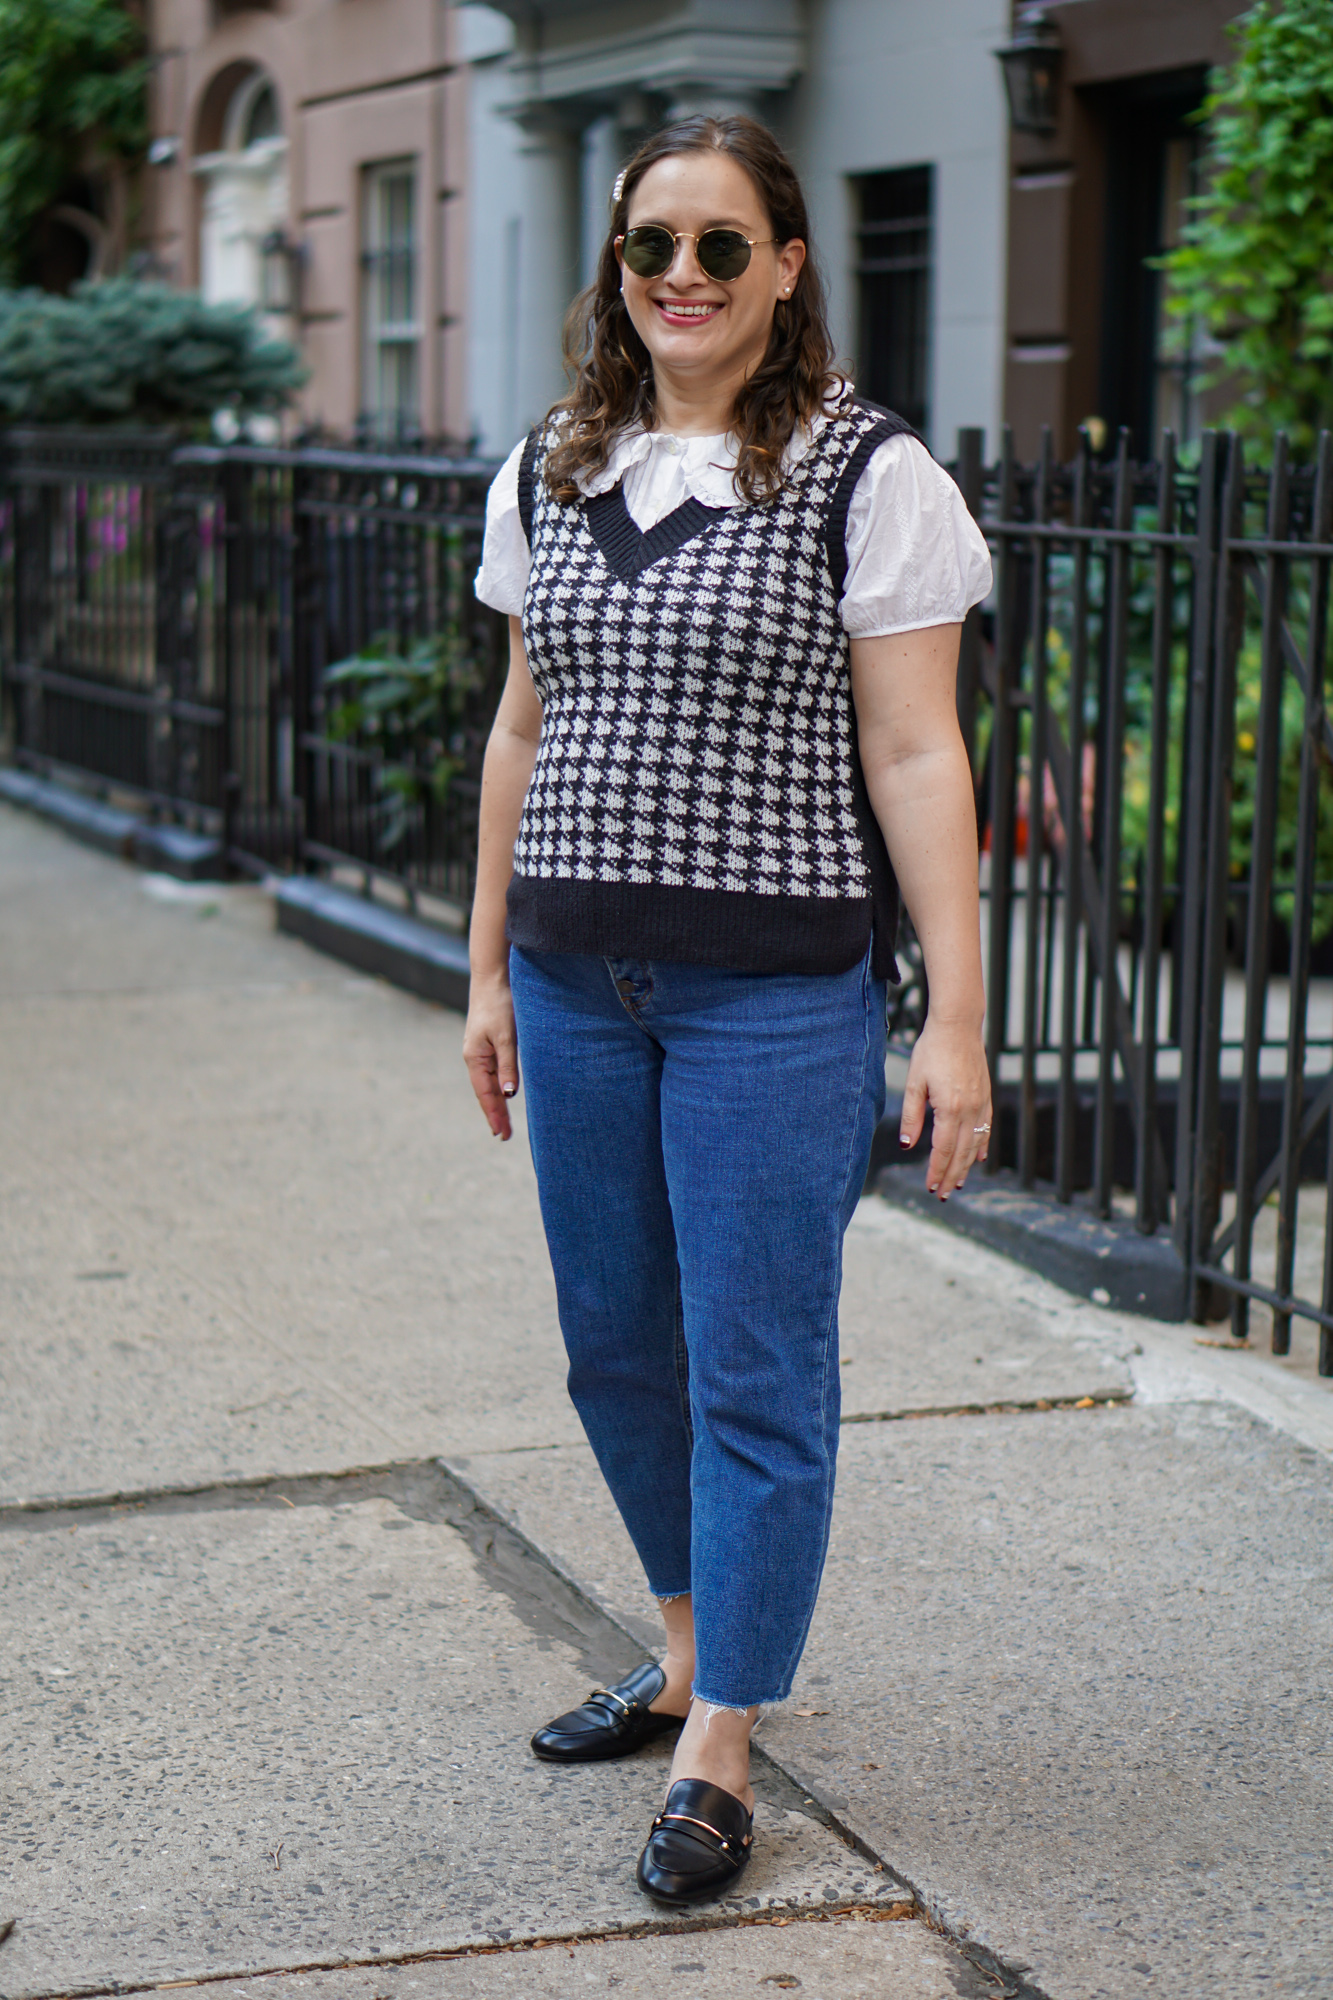 How to style a sweater vest